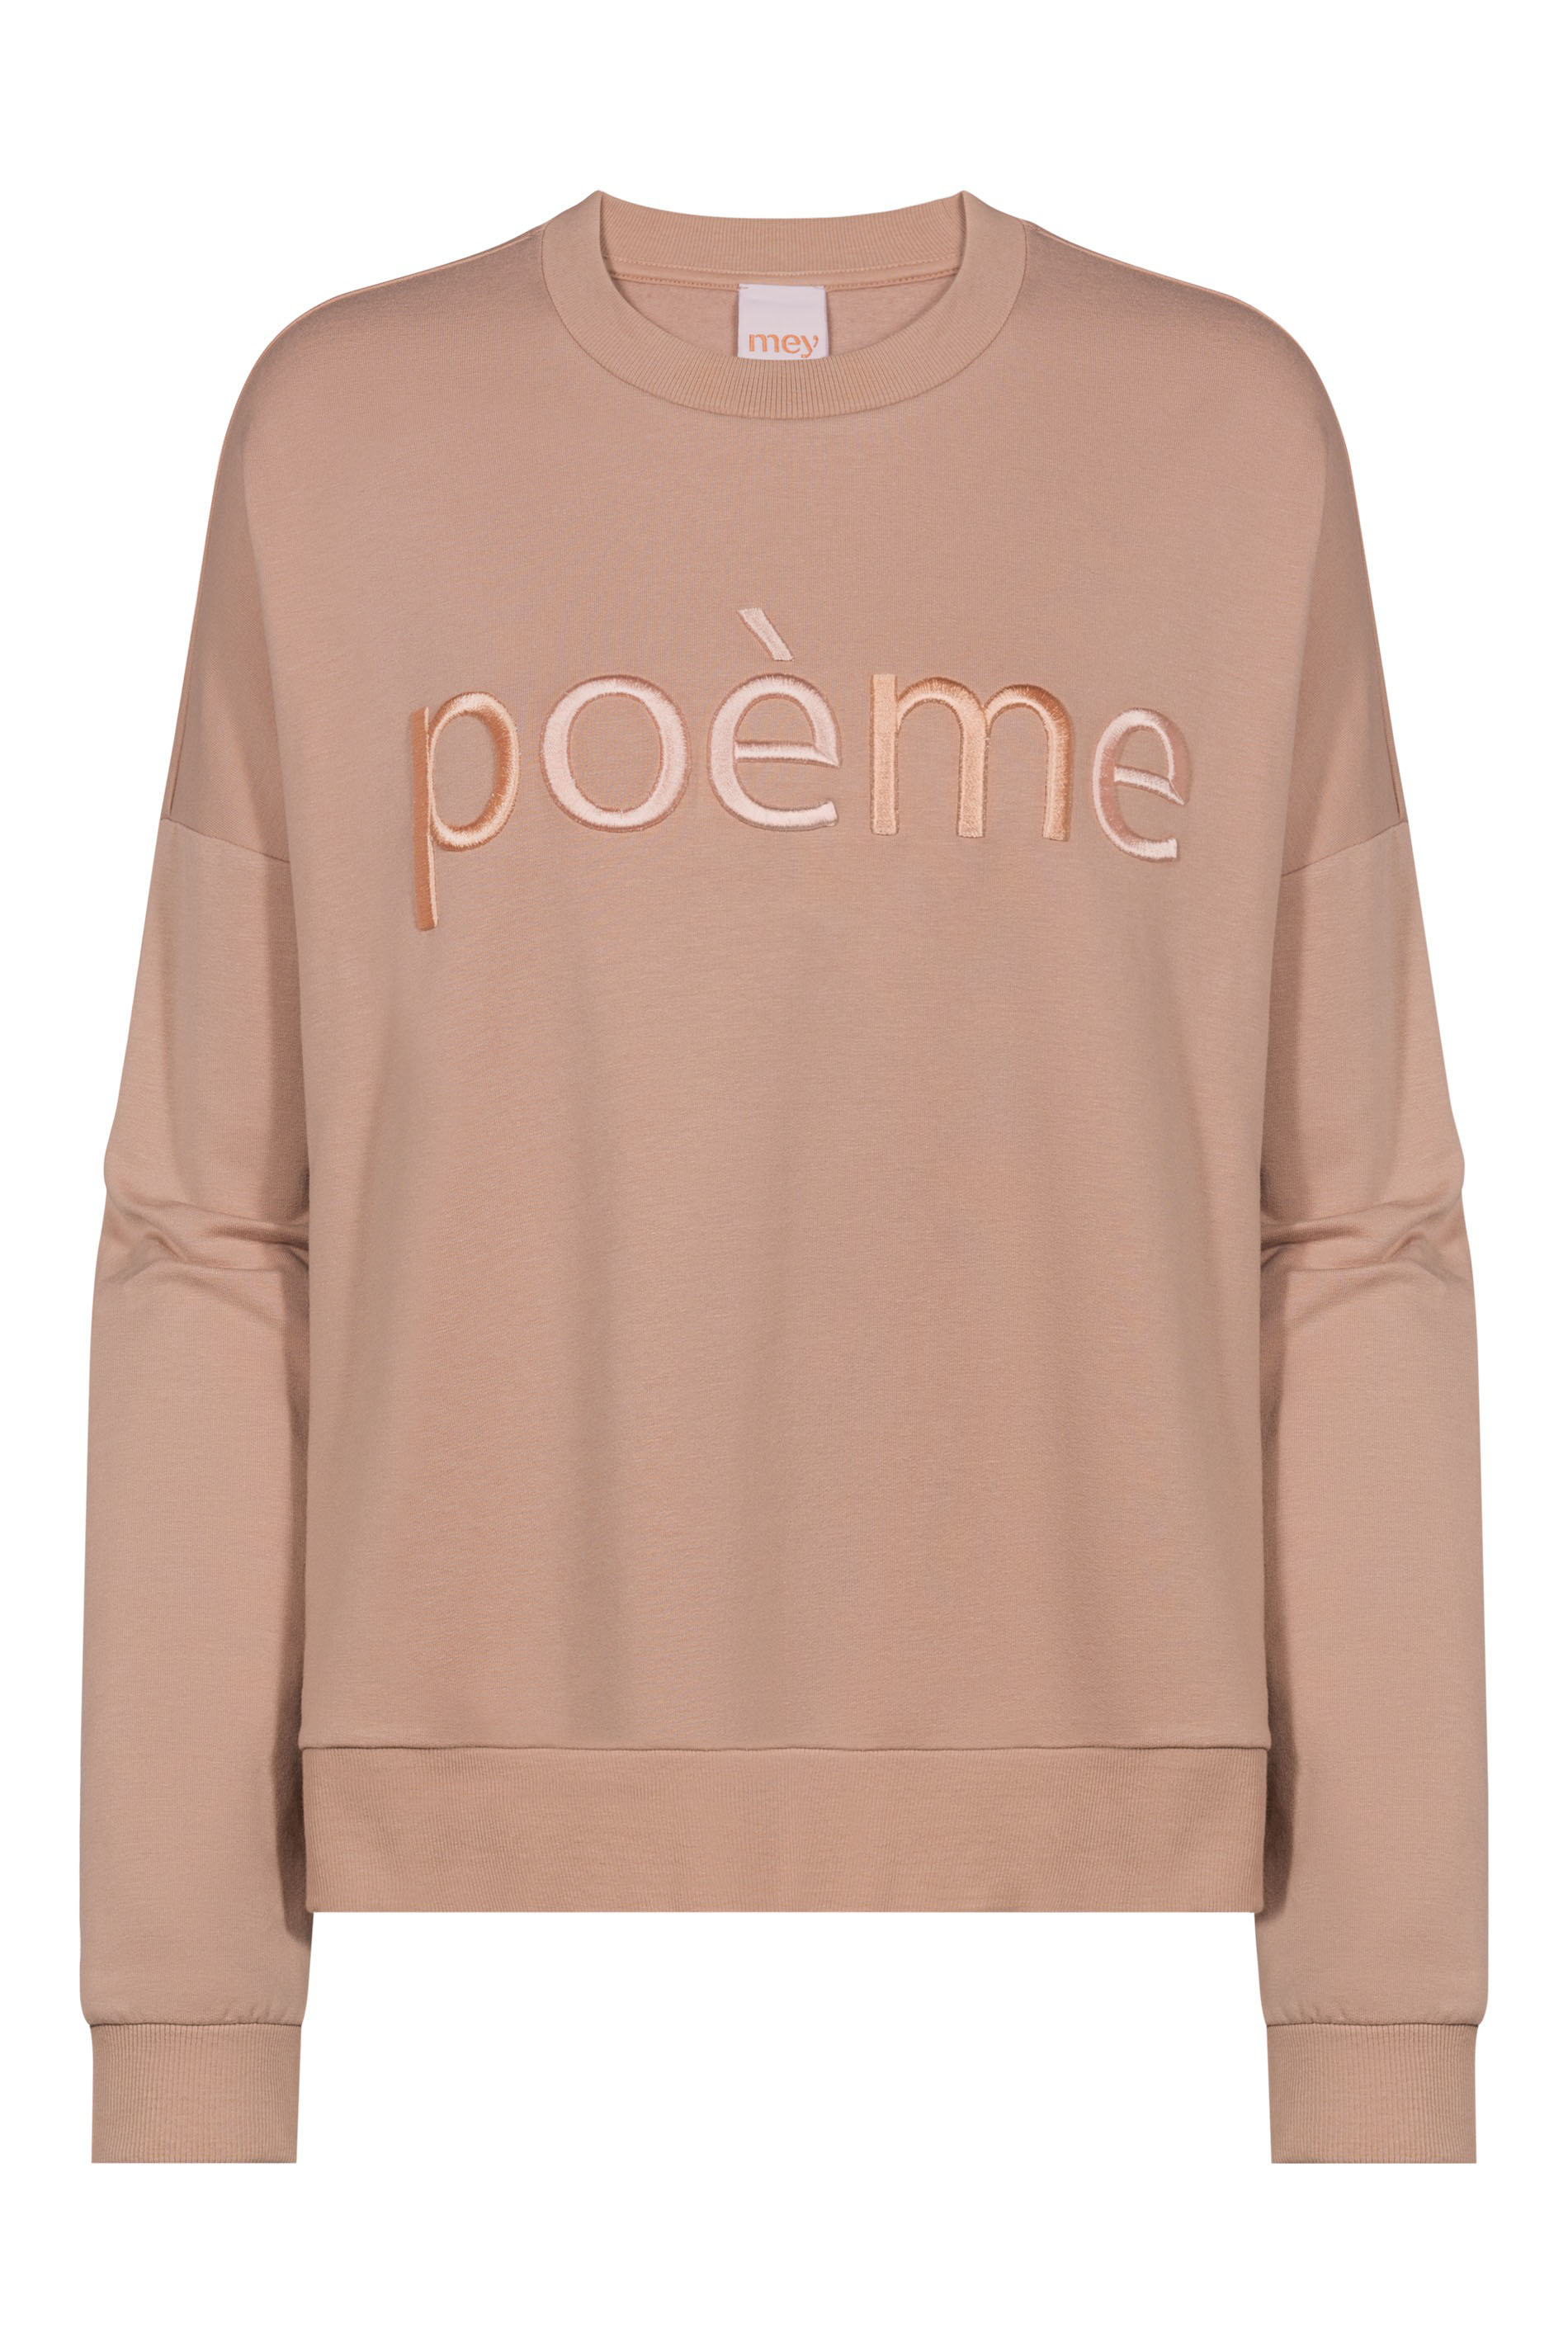 Sweater Serie Rose Uitknippen | mey®